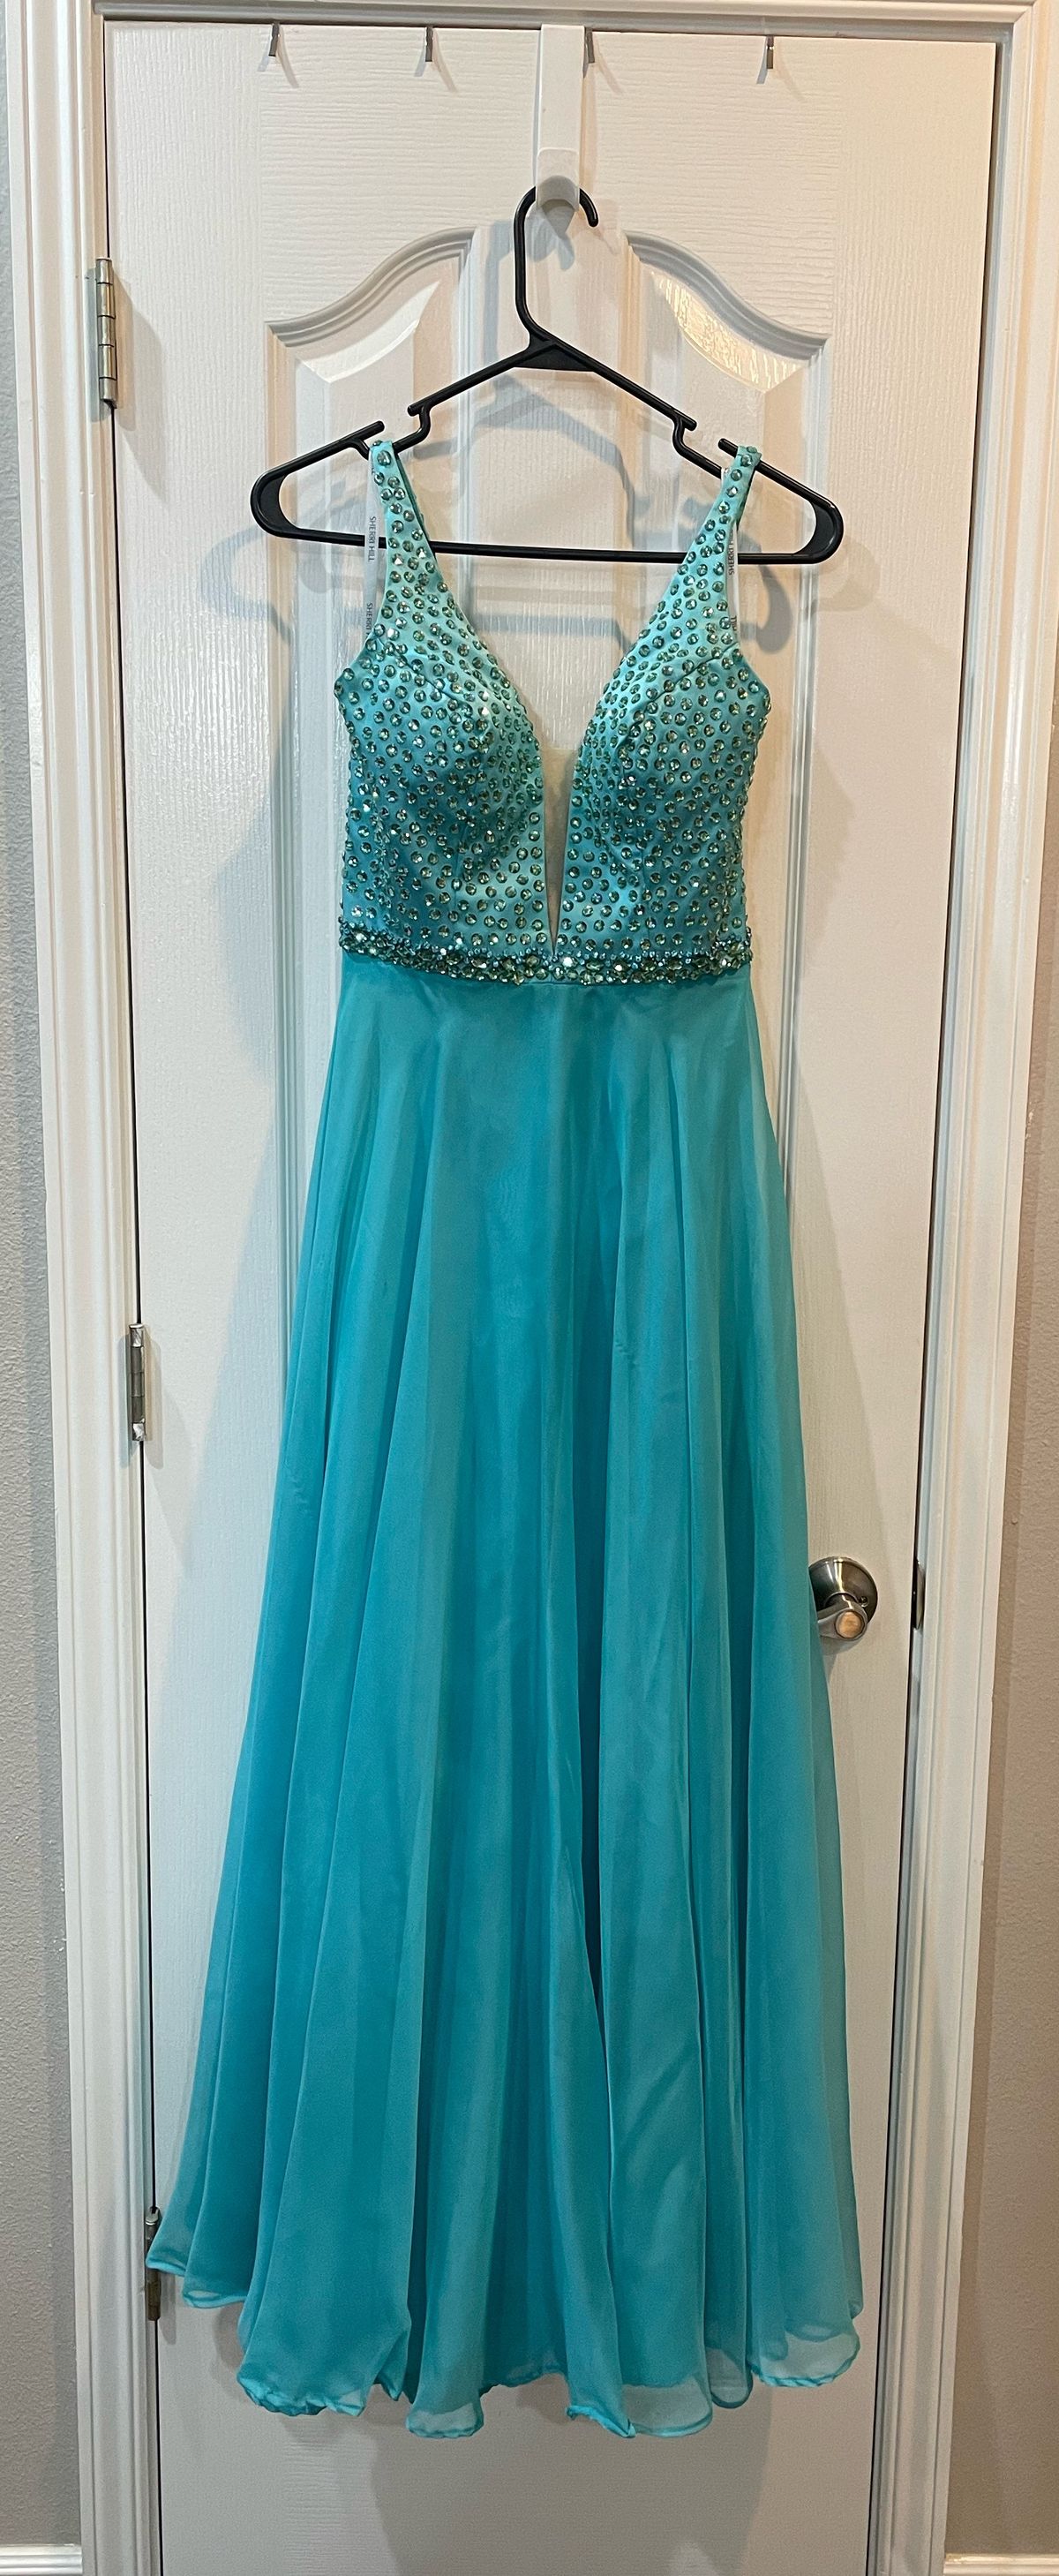 Sherri Hill Size 4 Bridesmaid Plunge Sequined Light Blue A-line Dress on Queenly